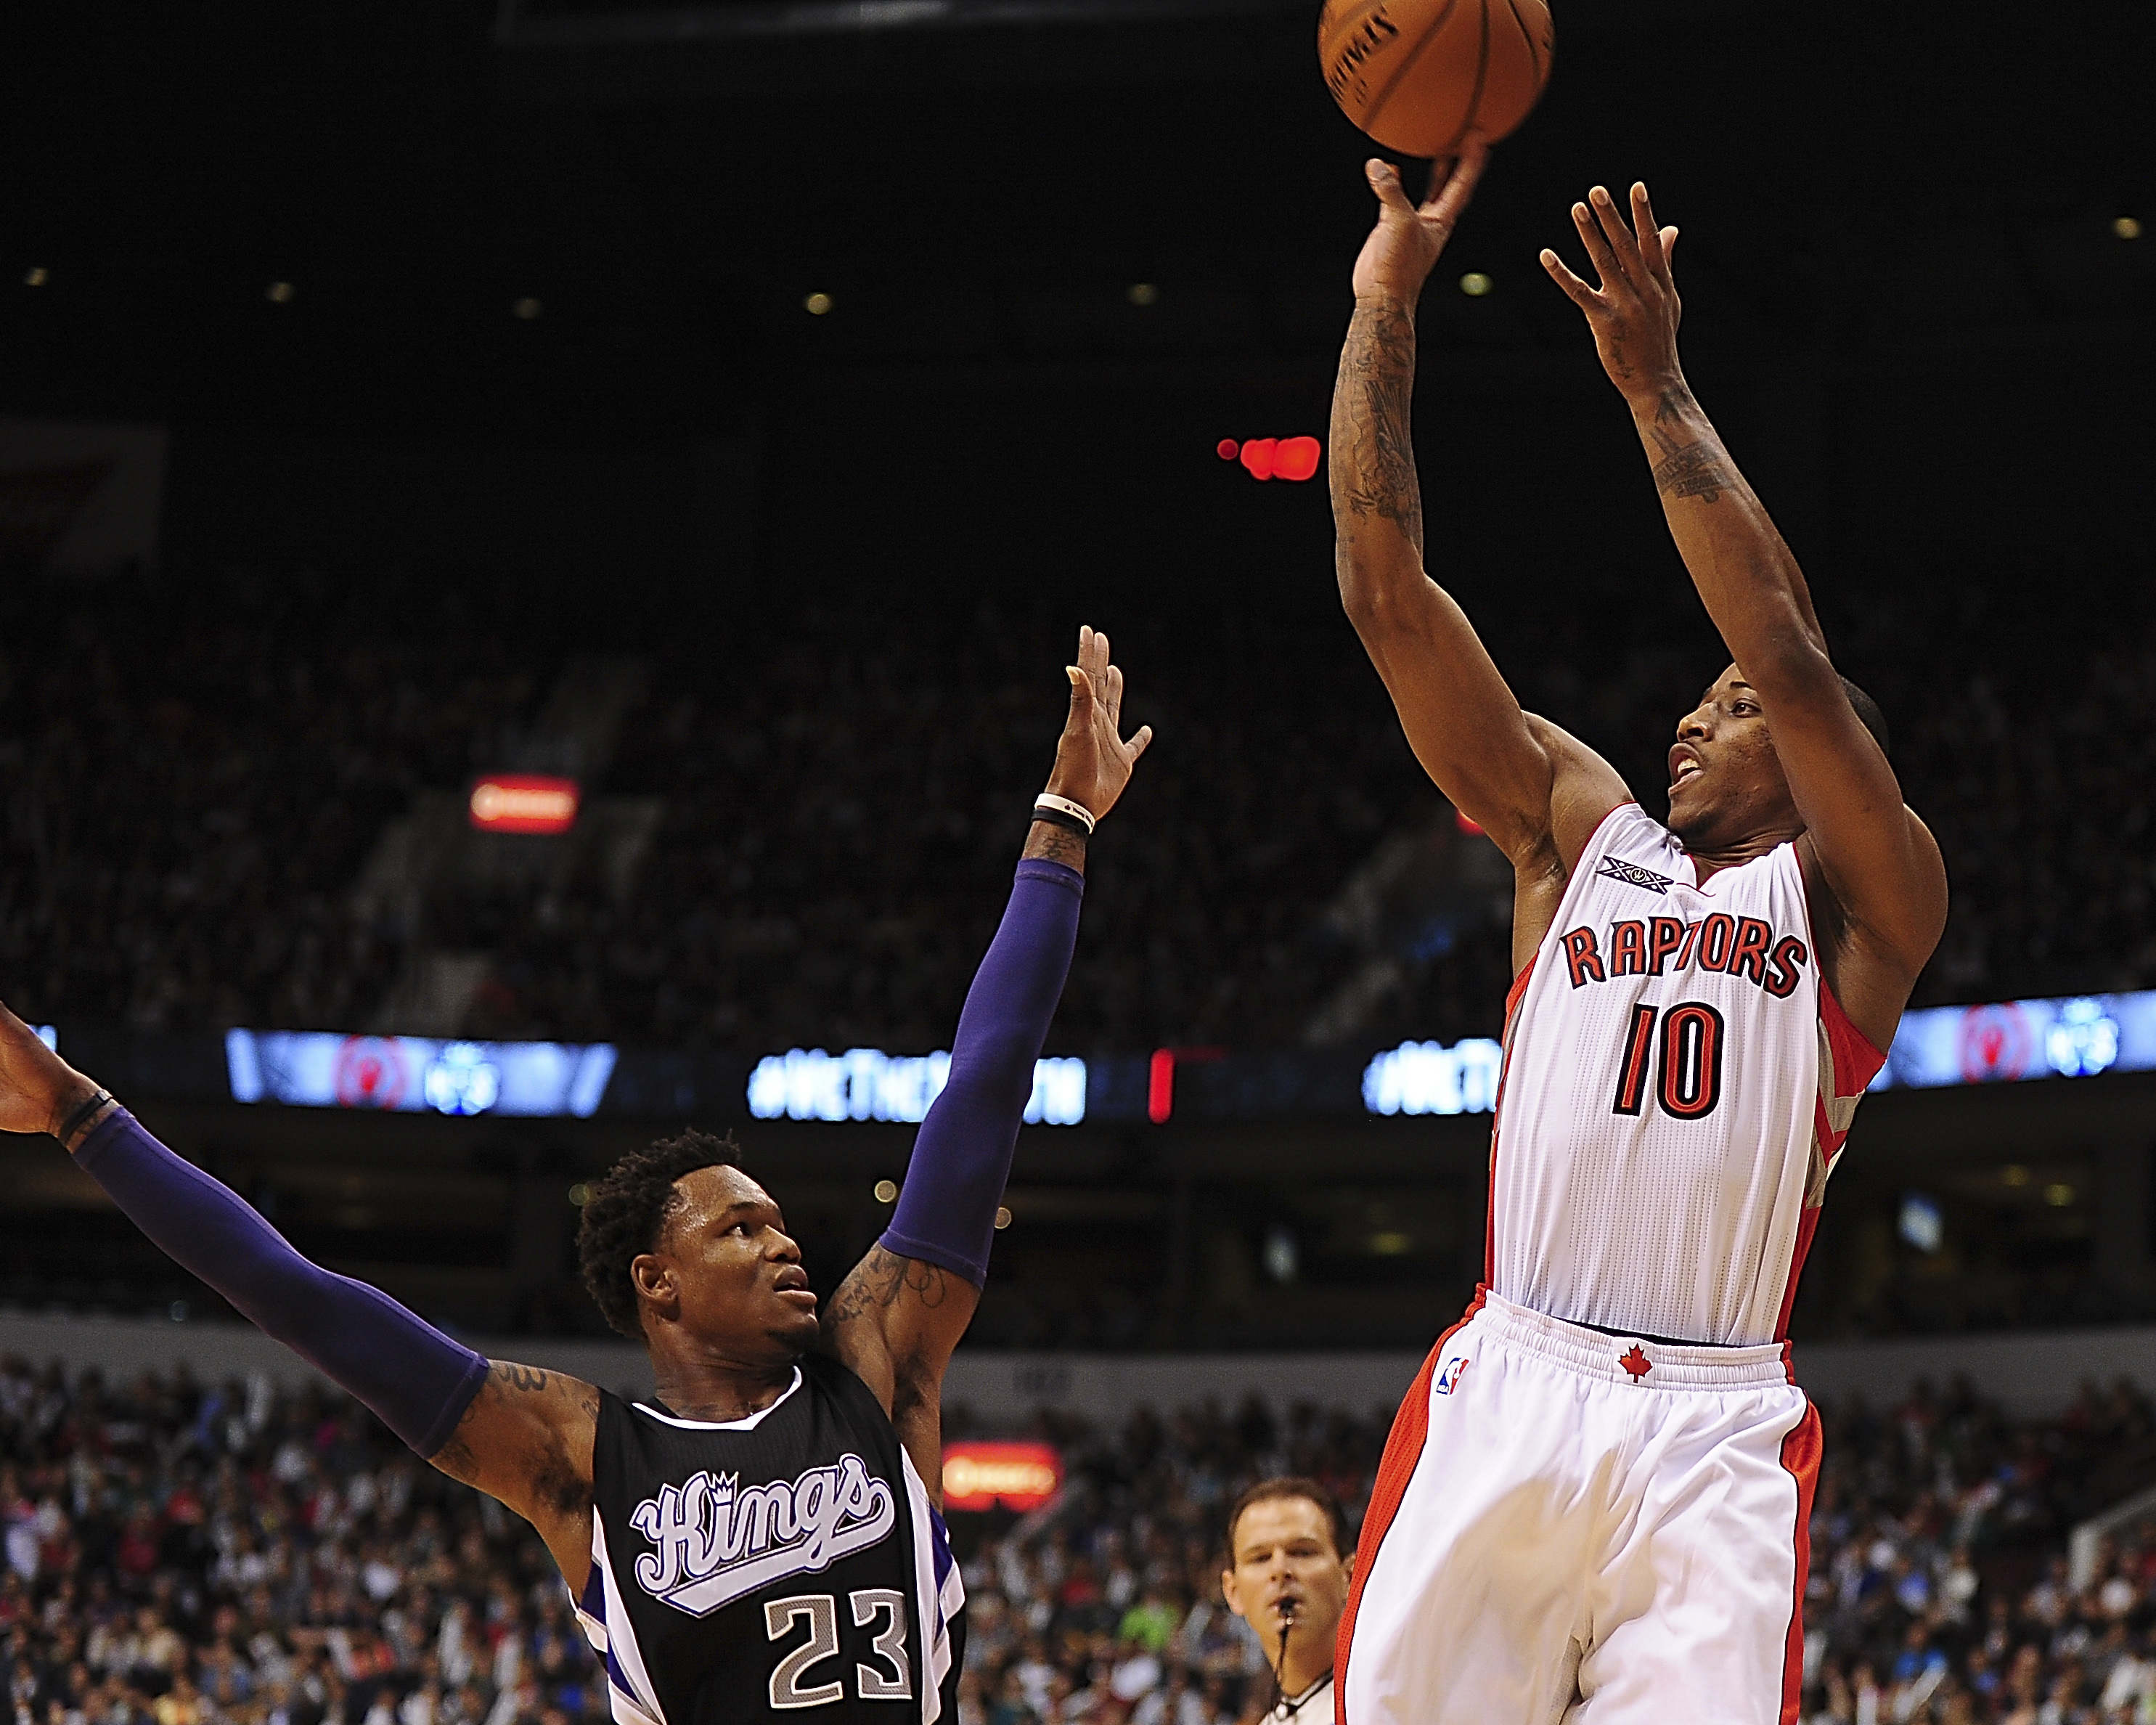 Ben McLemore must improve defensively in his second season. (Anne-Marie Sorvin-USA TODAY Sports)